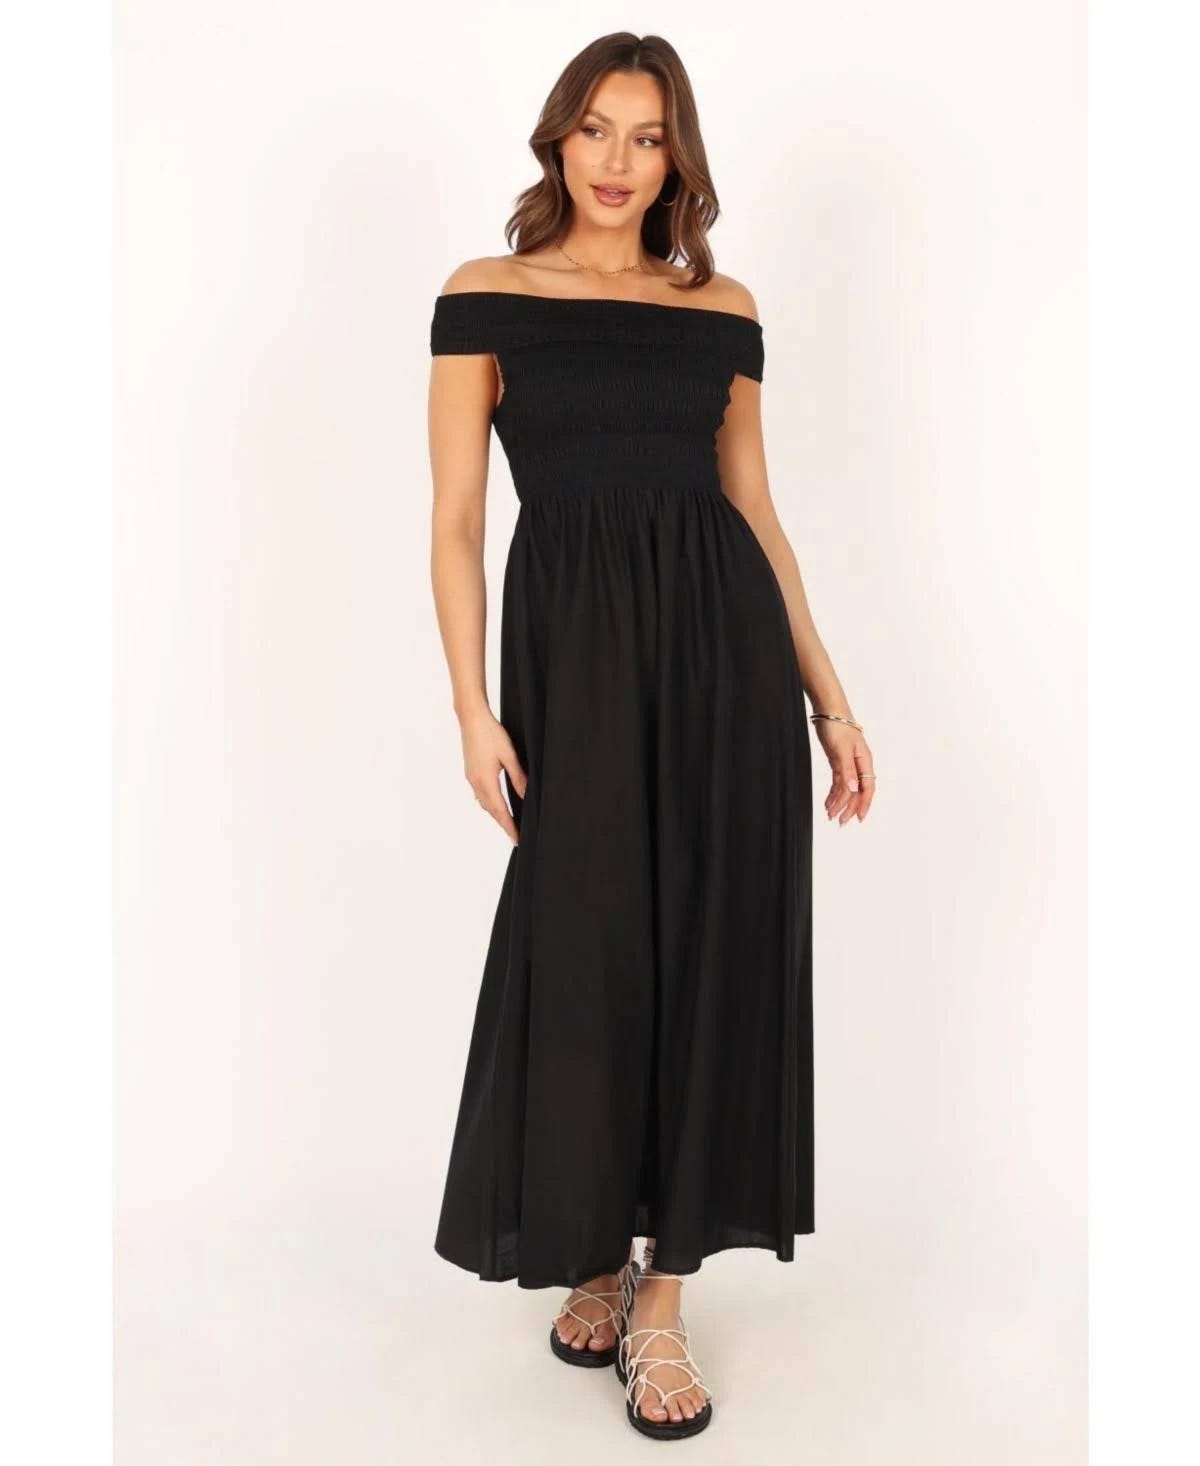 Black Off-Shoulder Maxi Dress by Petal & Pup Tessa - Chic and Comfortable | Image